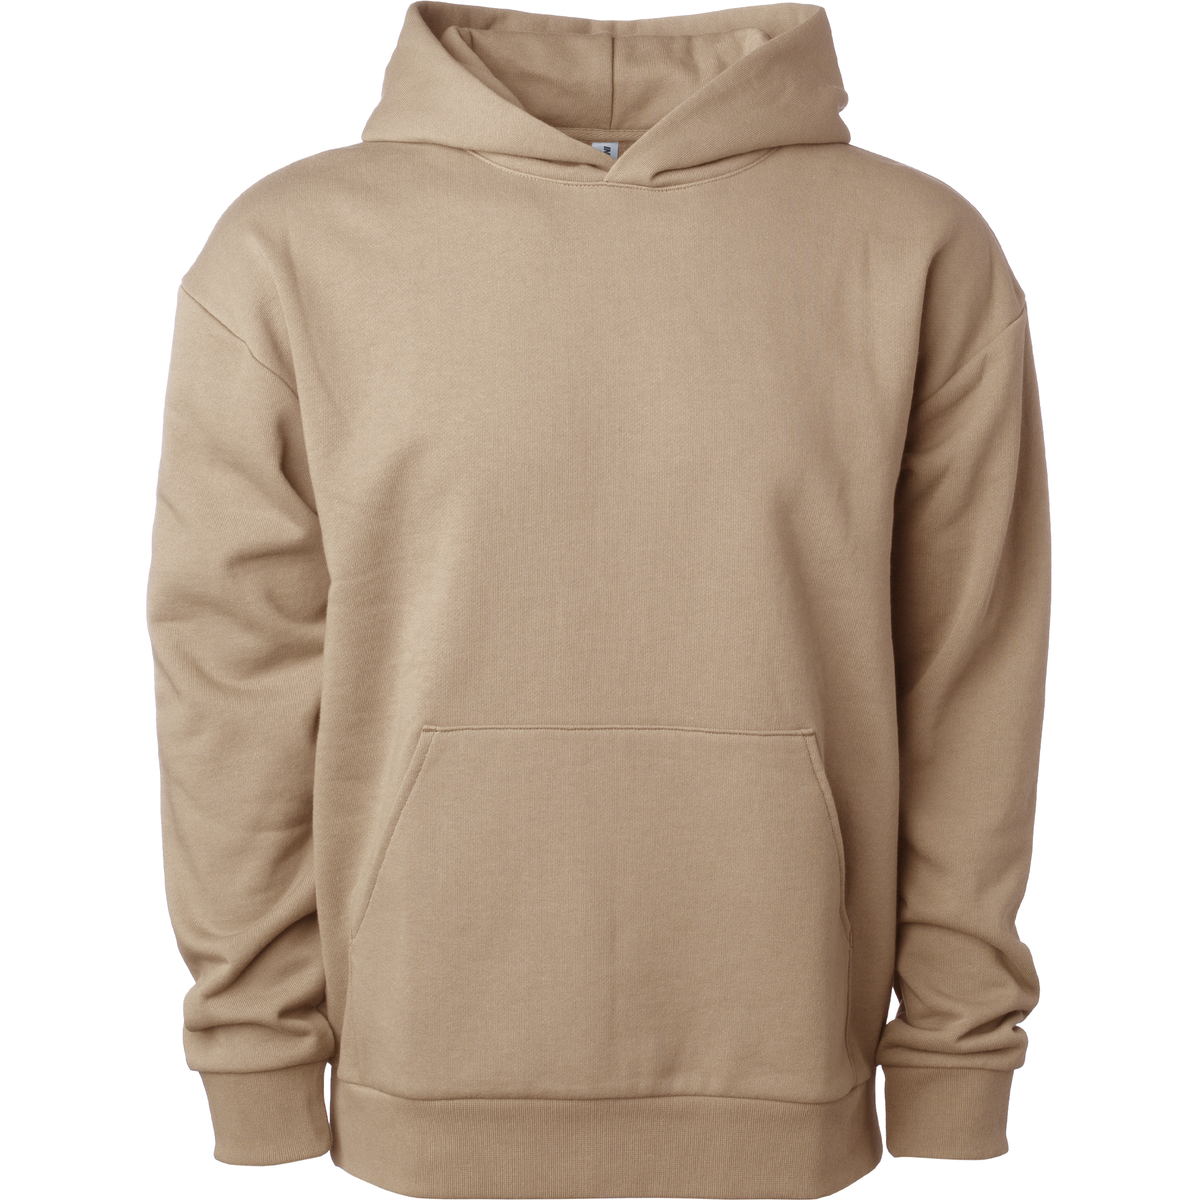 IND280SL - Avenue 280gm Midweight Pullover Hood